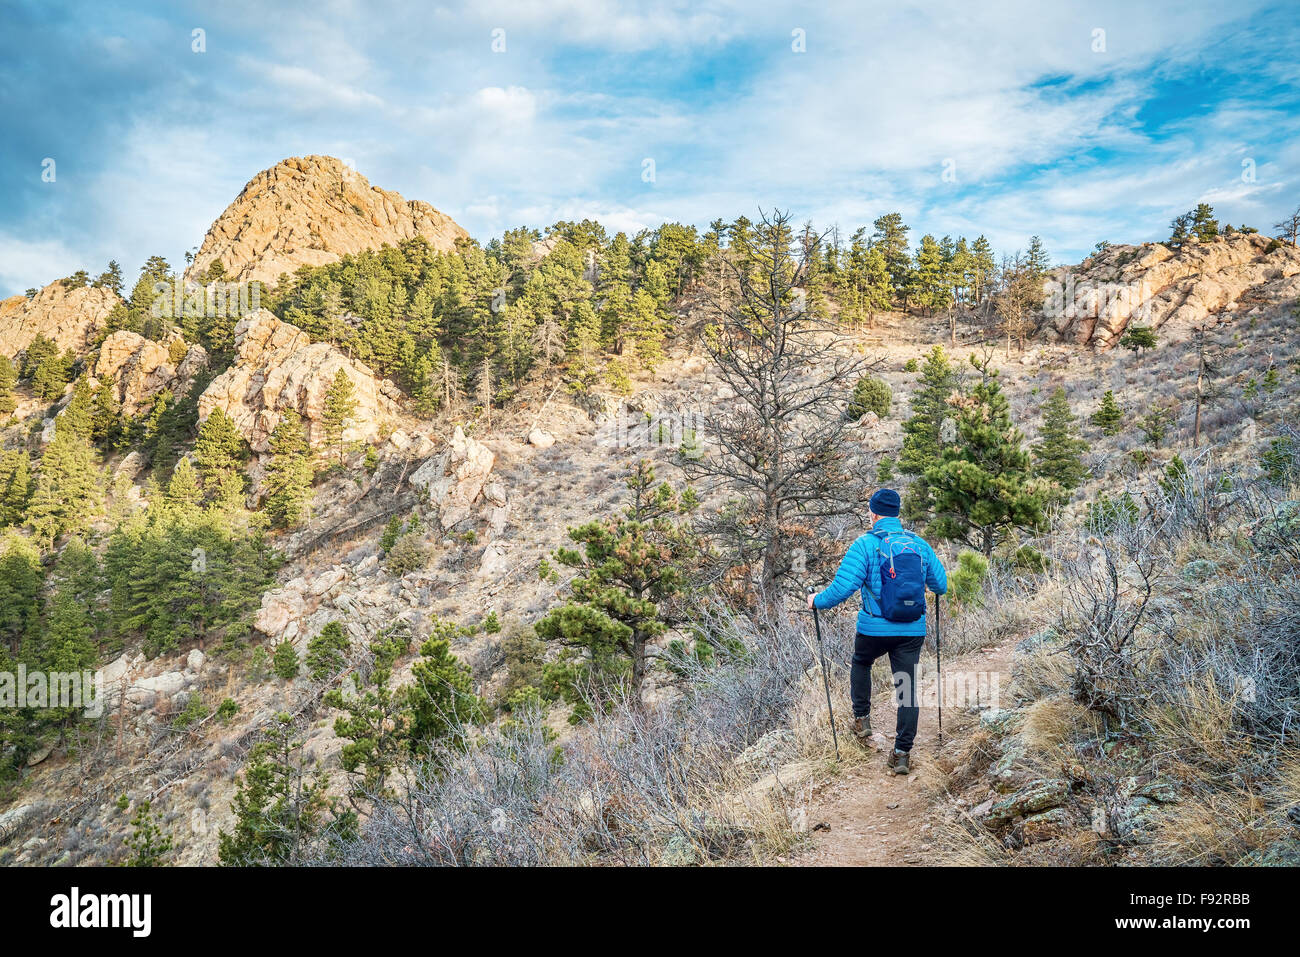 mail hiker with a backpack on a trail to Horsetooth Rock, a landmark of Fort Collins, Colorado, winter scenery without snow Stock Photo